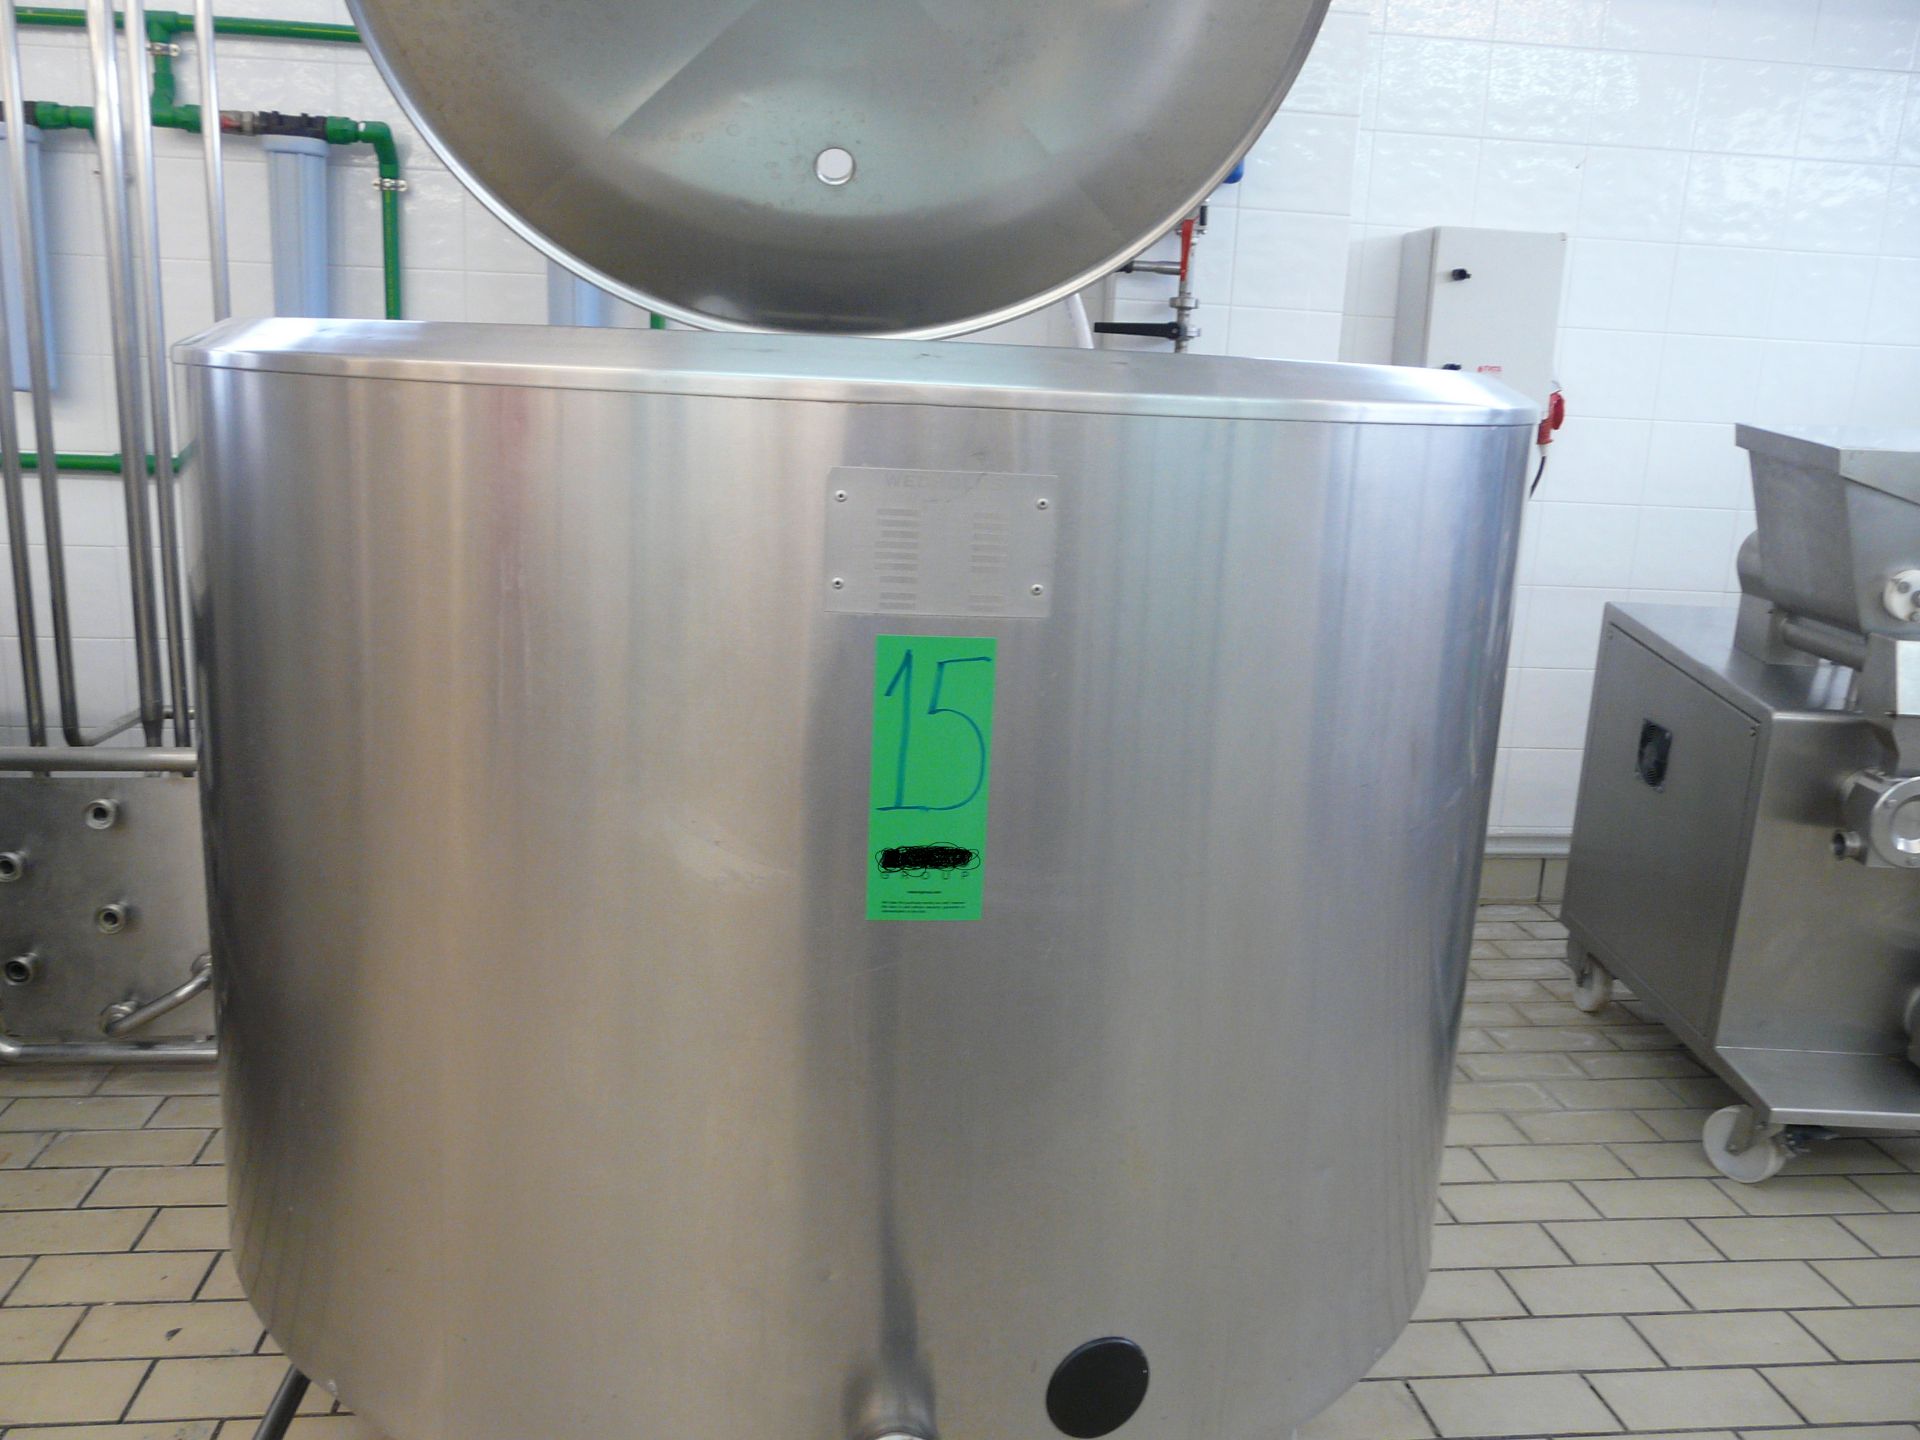 Mixing/Cooling Tank for Ice Cream 1020L with agitator, Type WEDHOLMS,Self contained Freon - Image 2 of 4